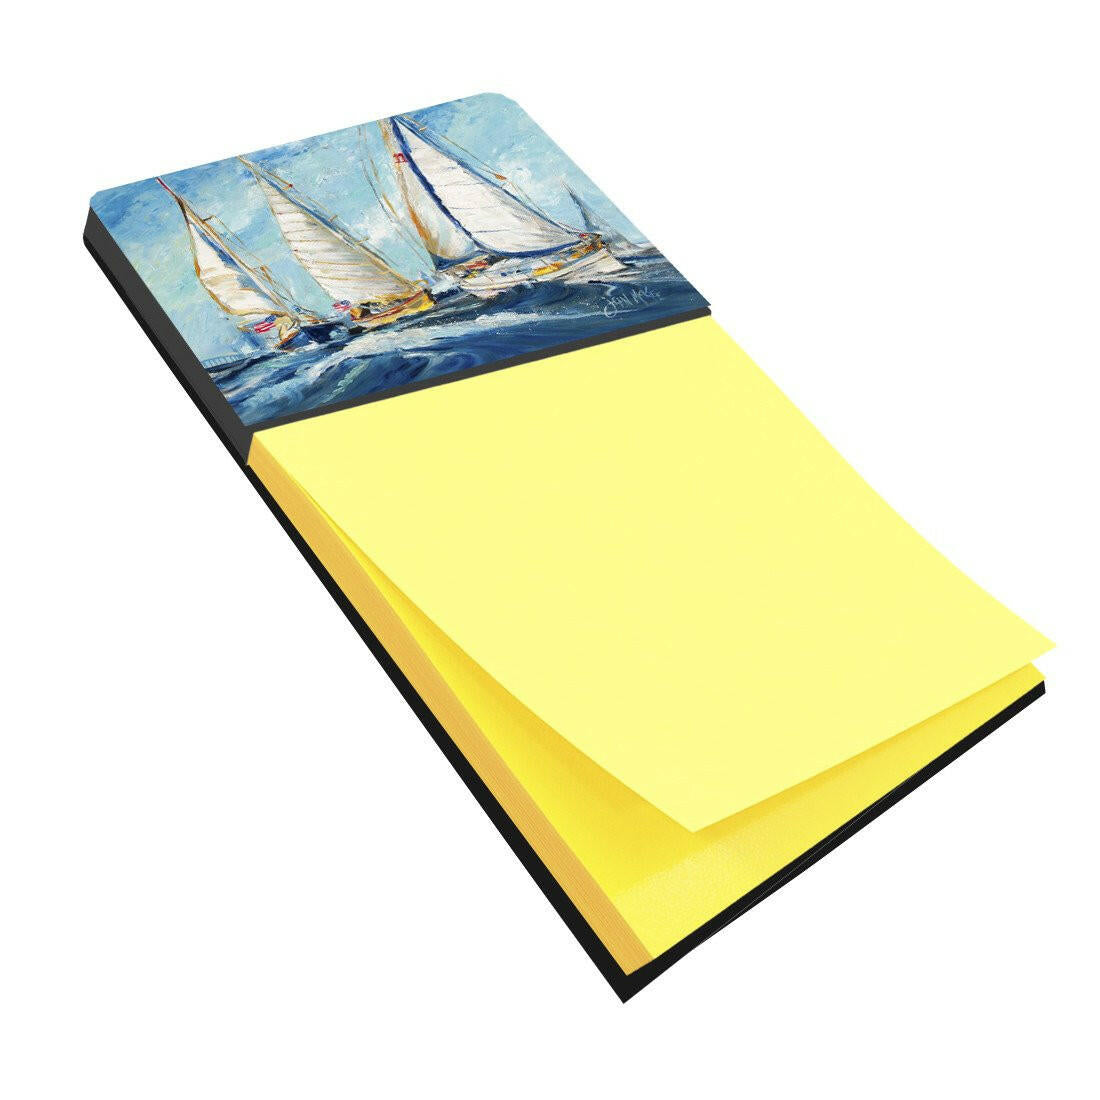 Roll me over Sailboats Sticky Note Holder JMK1027SN by Caroline's Treasures